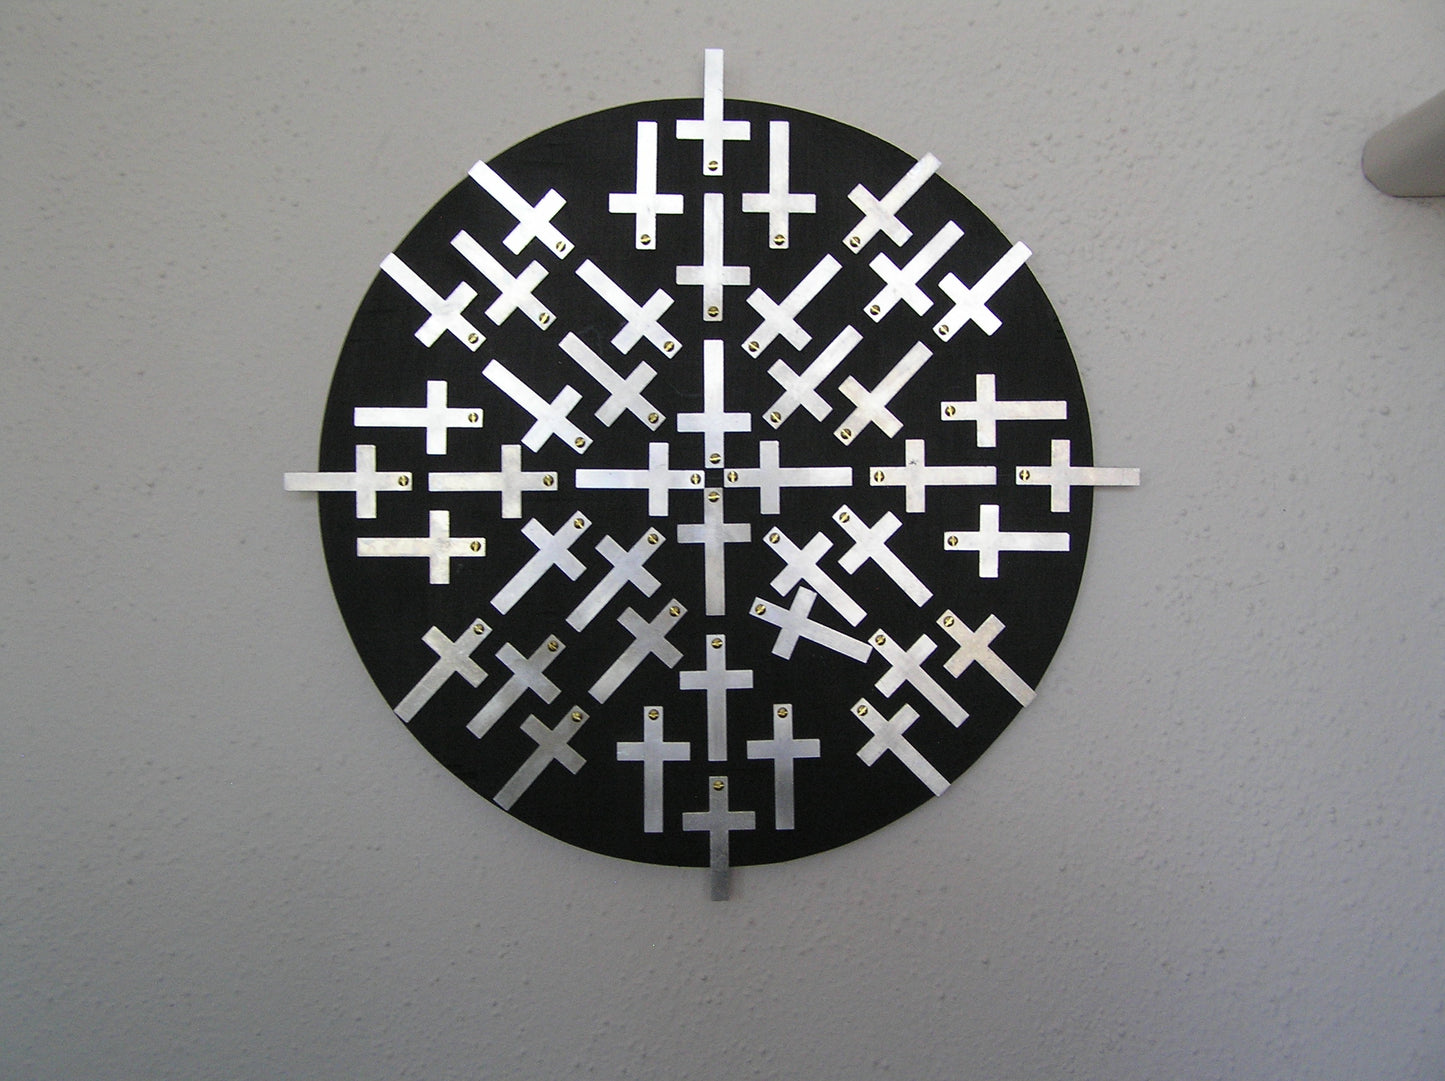 "Cross Roads" Mandalas w / Cross Mixed Media Artist: Bruce Allemani Round black board with aluminum crosses   Brass screws hold crosses on round black board  Wire on back for wall hanging  12" long x 12" wide x 1/2" high  Please note, each piece is custom designed by the Artist , with a slight variation between each piece